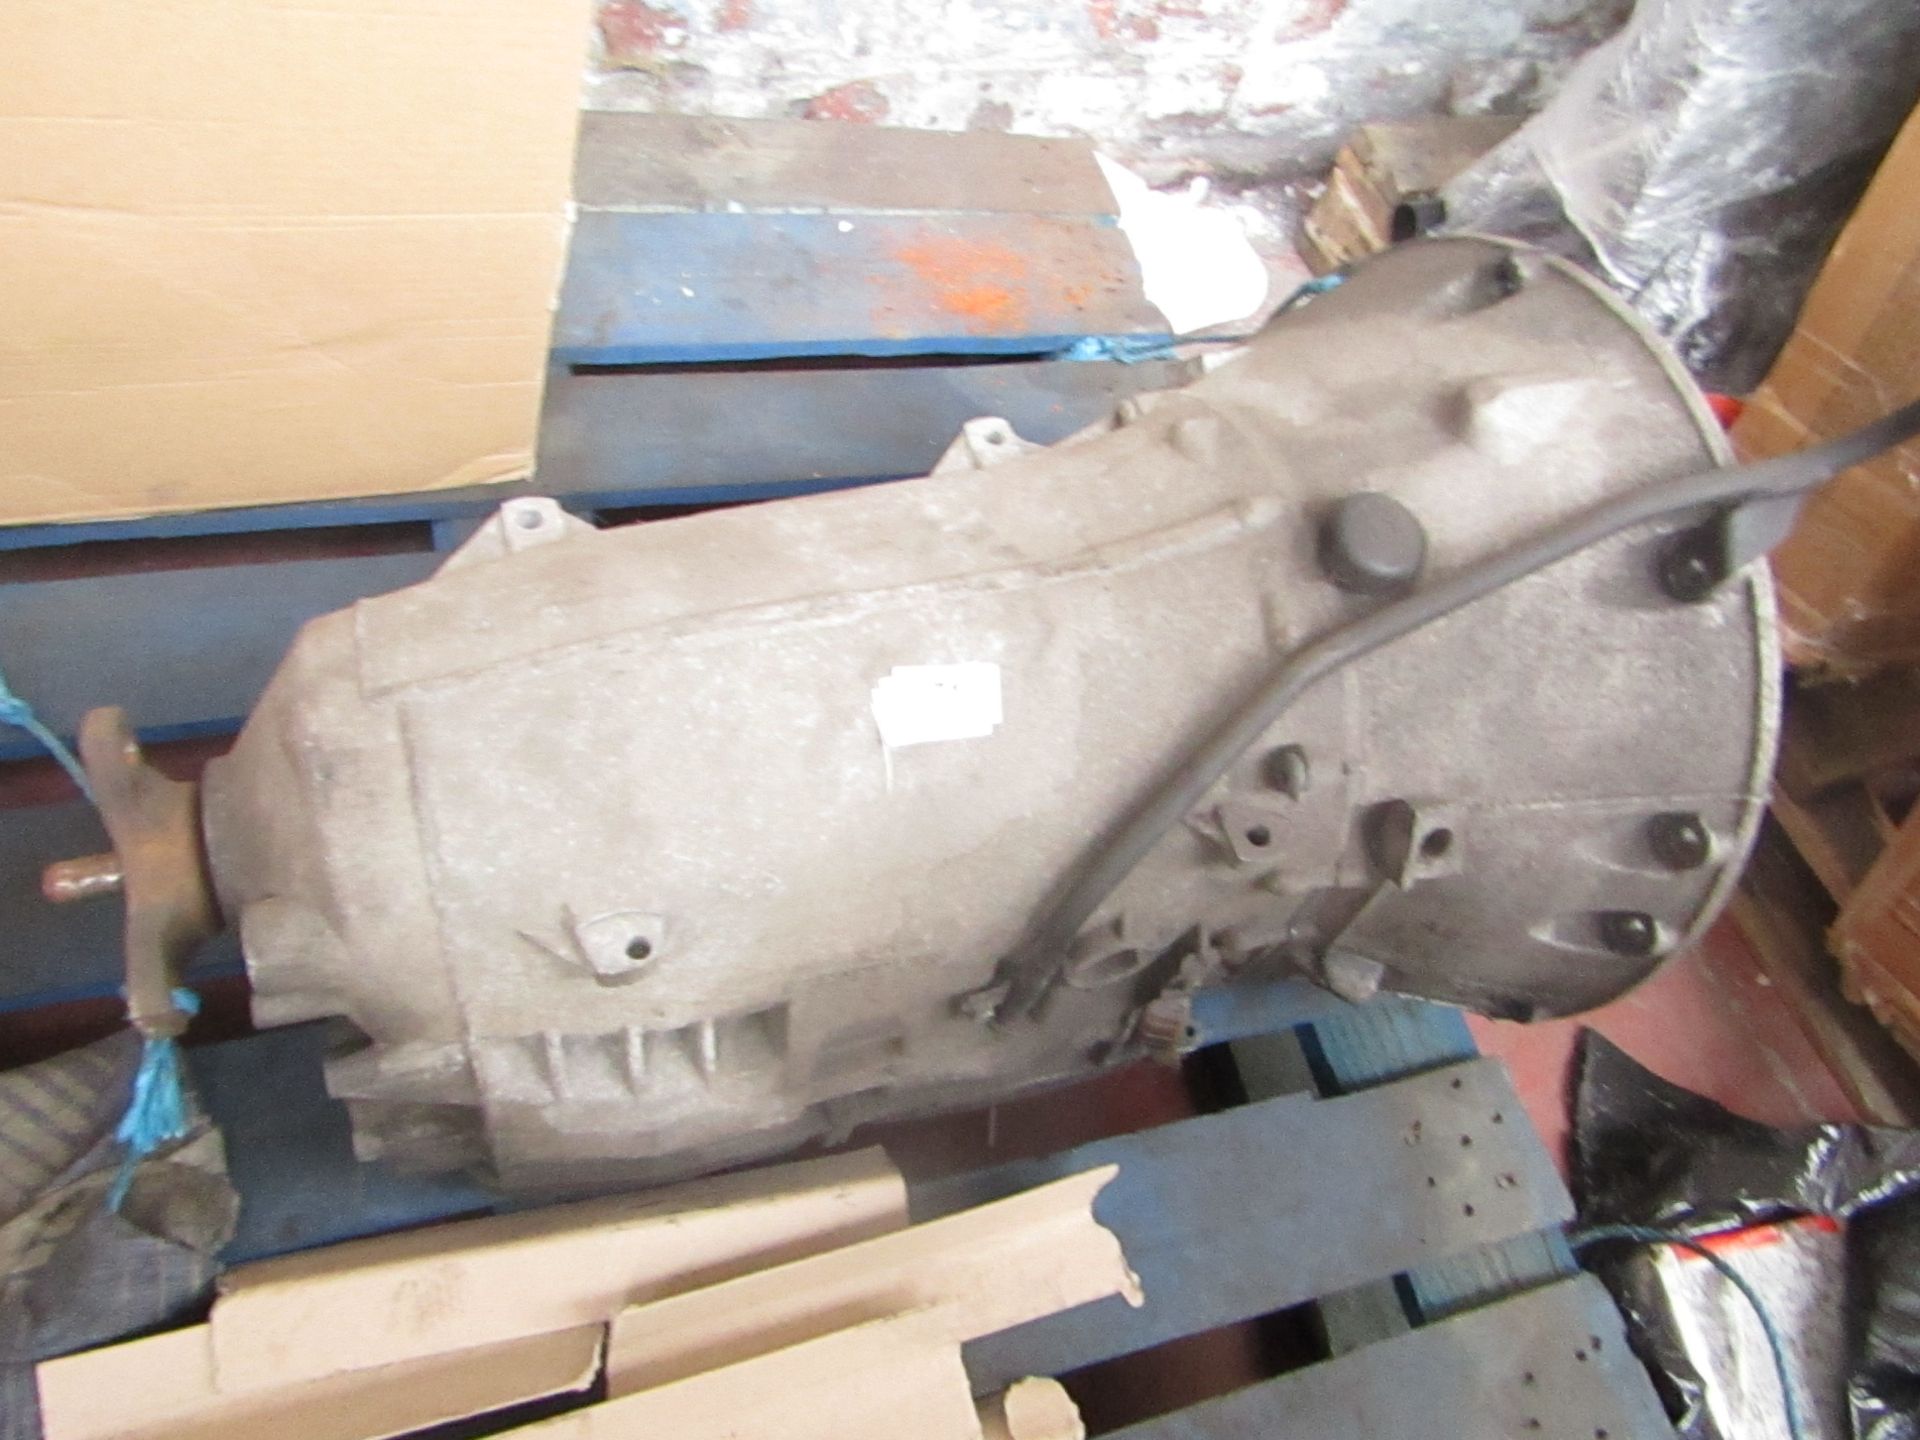 MERCEDES C CLASS W209 AUTOMATIC GEARBOX - Used Condition, Has Not Been Serviced For Some Time